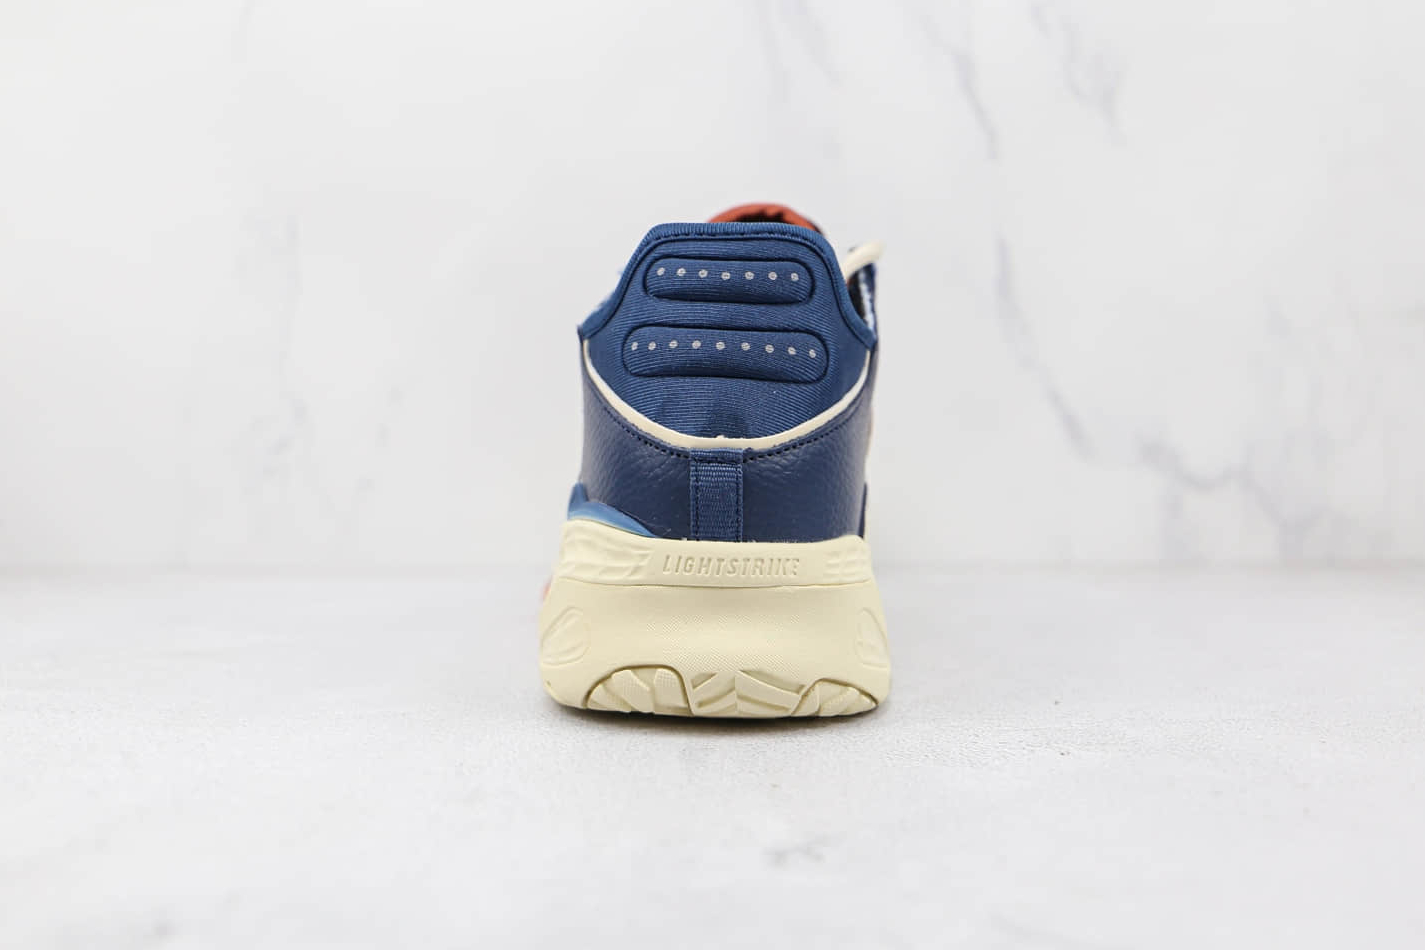 Adidas Niteball 'Crew Navy Wild Sepia' FX7650 - Sporty Style for Any Occasion